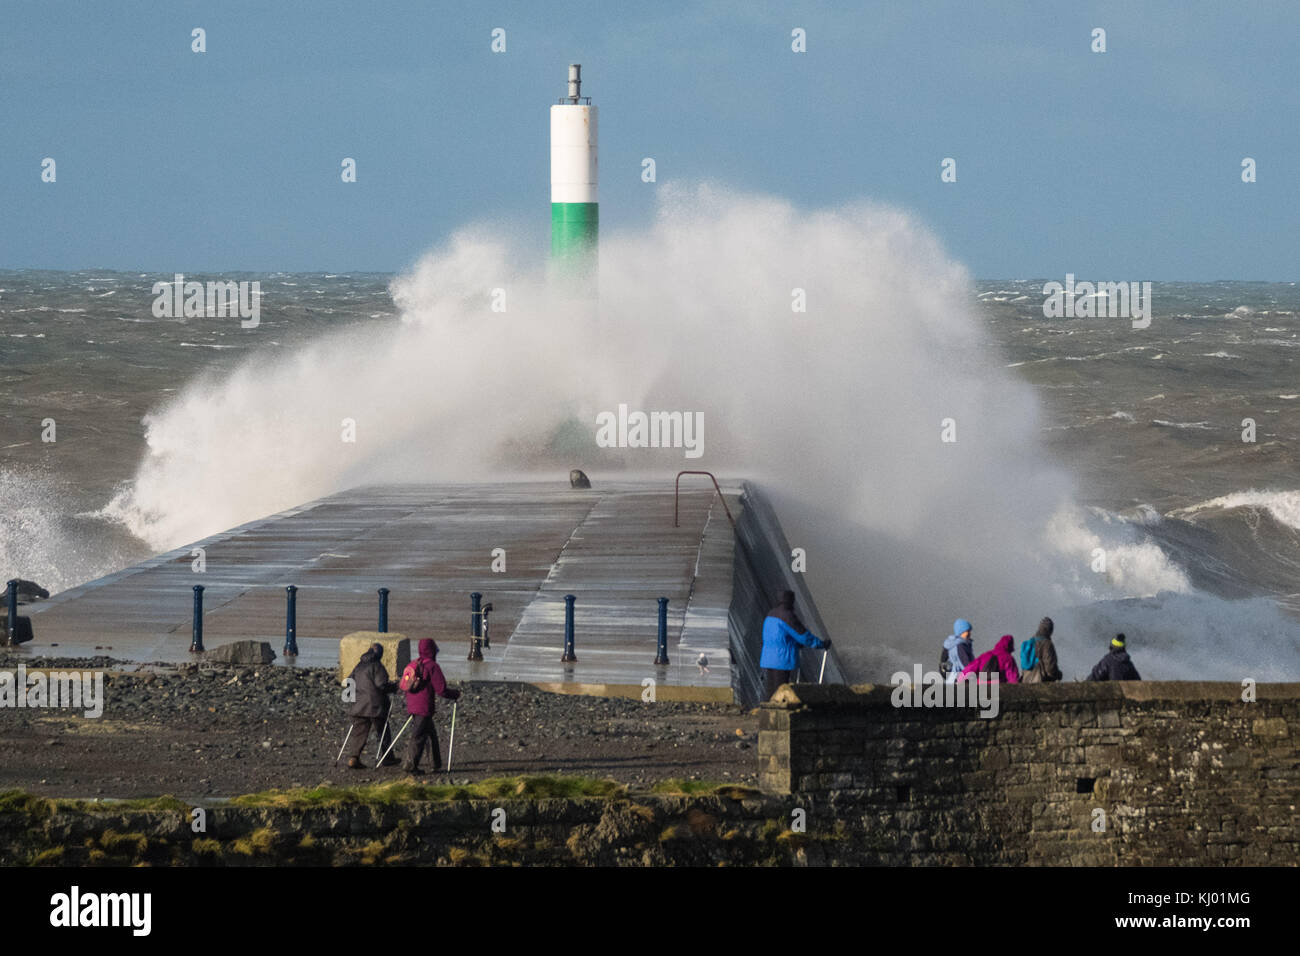 Aberystwyth Wales UK, Thursday 23 November 2017 UK Weather: A group of walkers look on as high tides and very strong winds combine to bring waves crashing into the sea defences and the harbour lighthouse in Aberystwyth, on the Cardigan Bay coast of west wales. photo Credit: Keith Morris/Alamy Live News Stock Photo